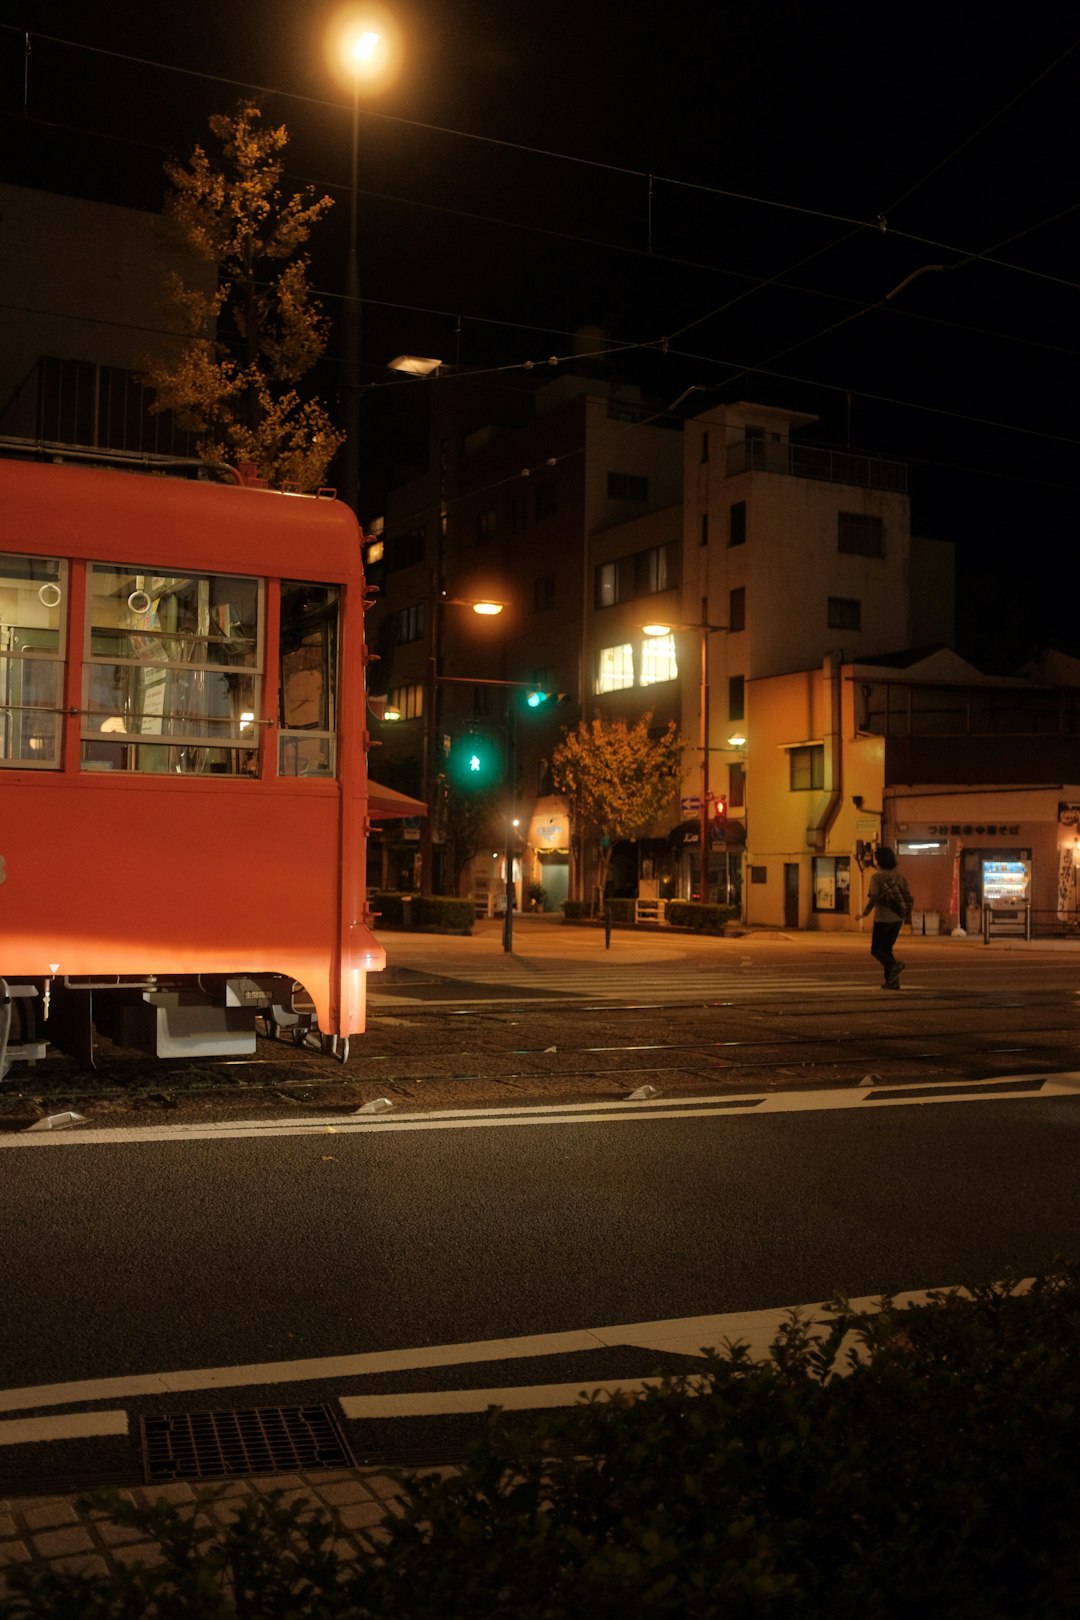 red bus on the road during night time